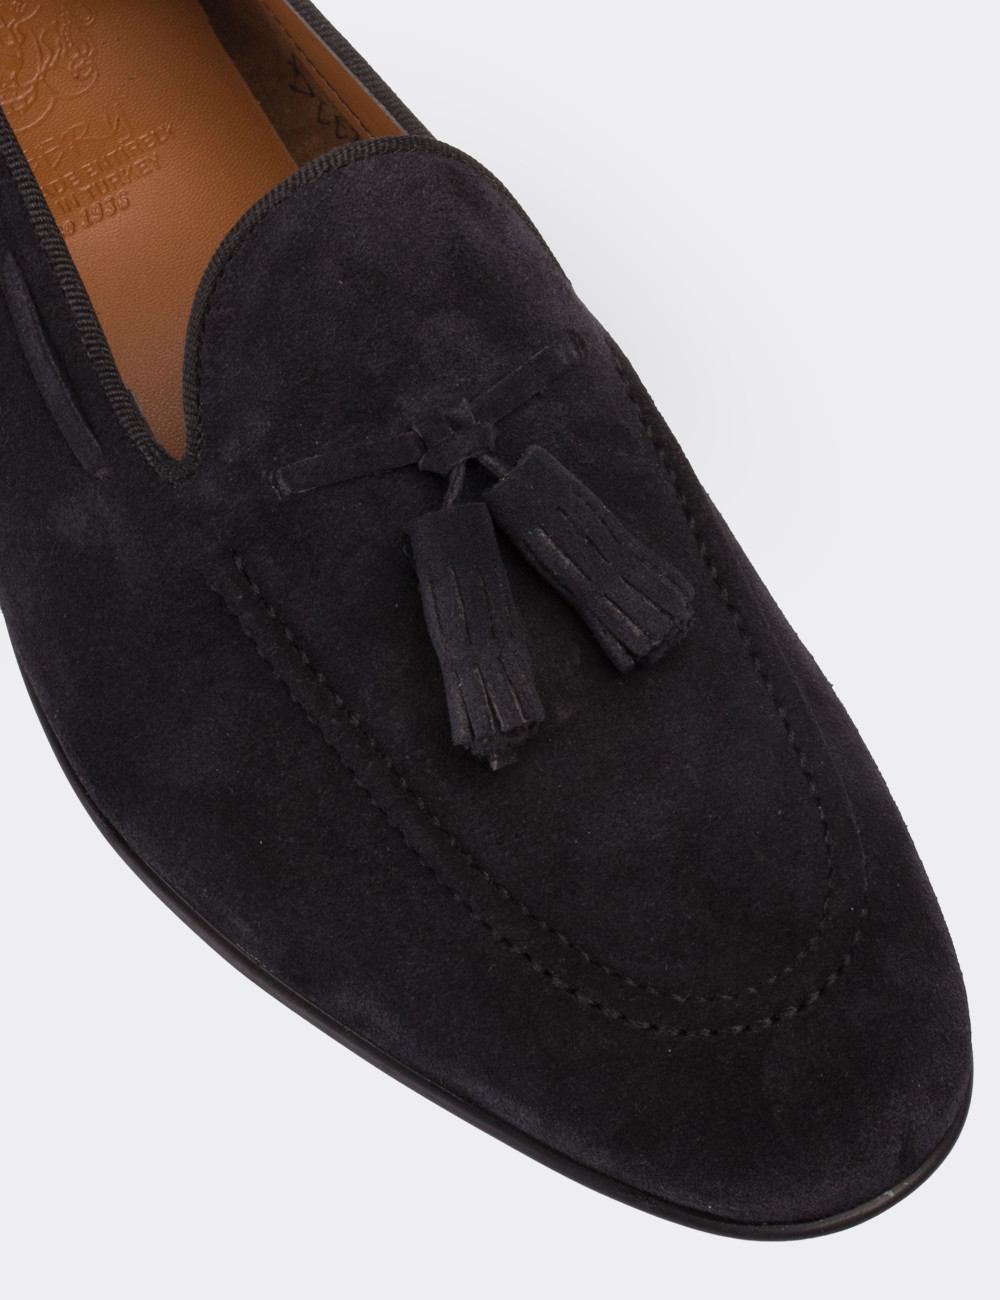 Navy Suede Leather Loafers - 01642MLCVC01